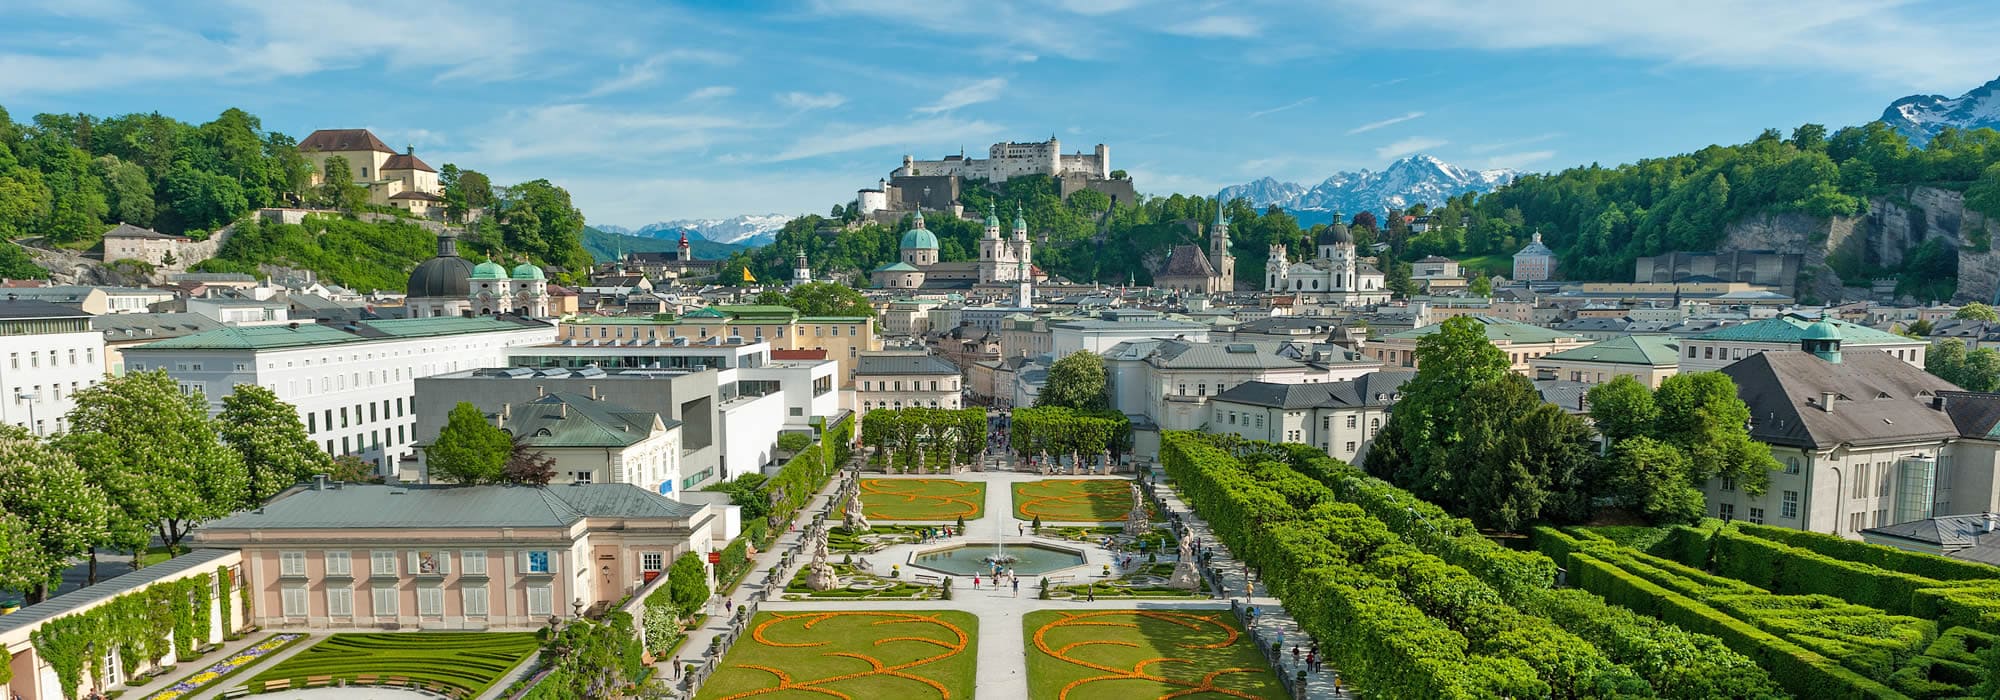 The beautiful city of Salzburg - The Hohensalzburg Fortress and the Mirabell garden